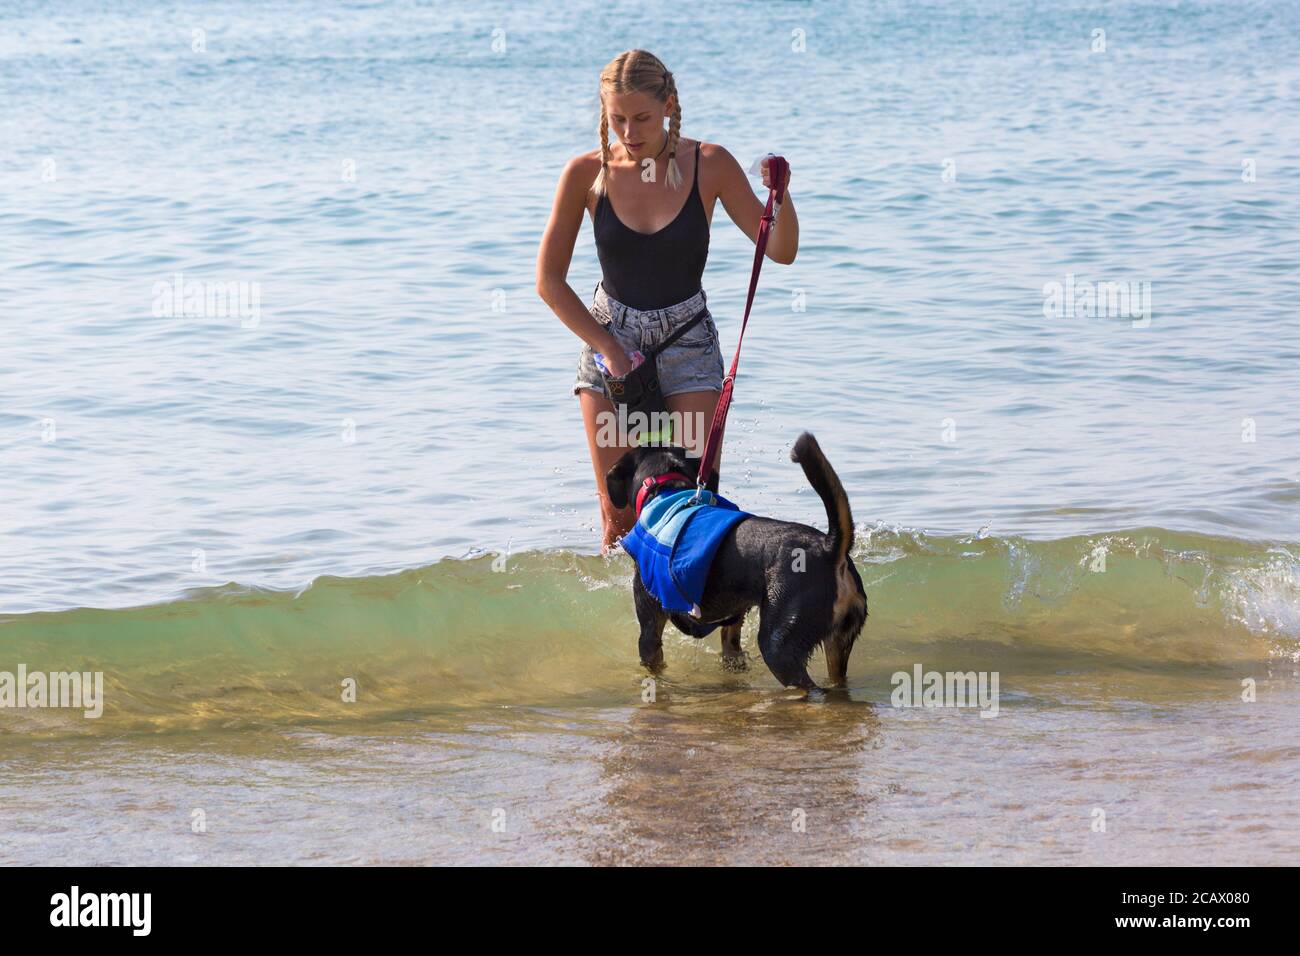 Young woman with Swiss Mountain dog in the sea at Branksome Dene Chine, Poole, Dorset, UK on hot sunny day in August Stock Photo